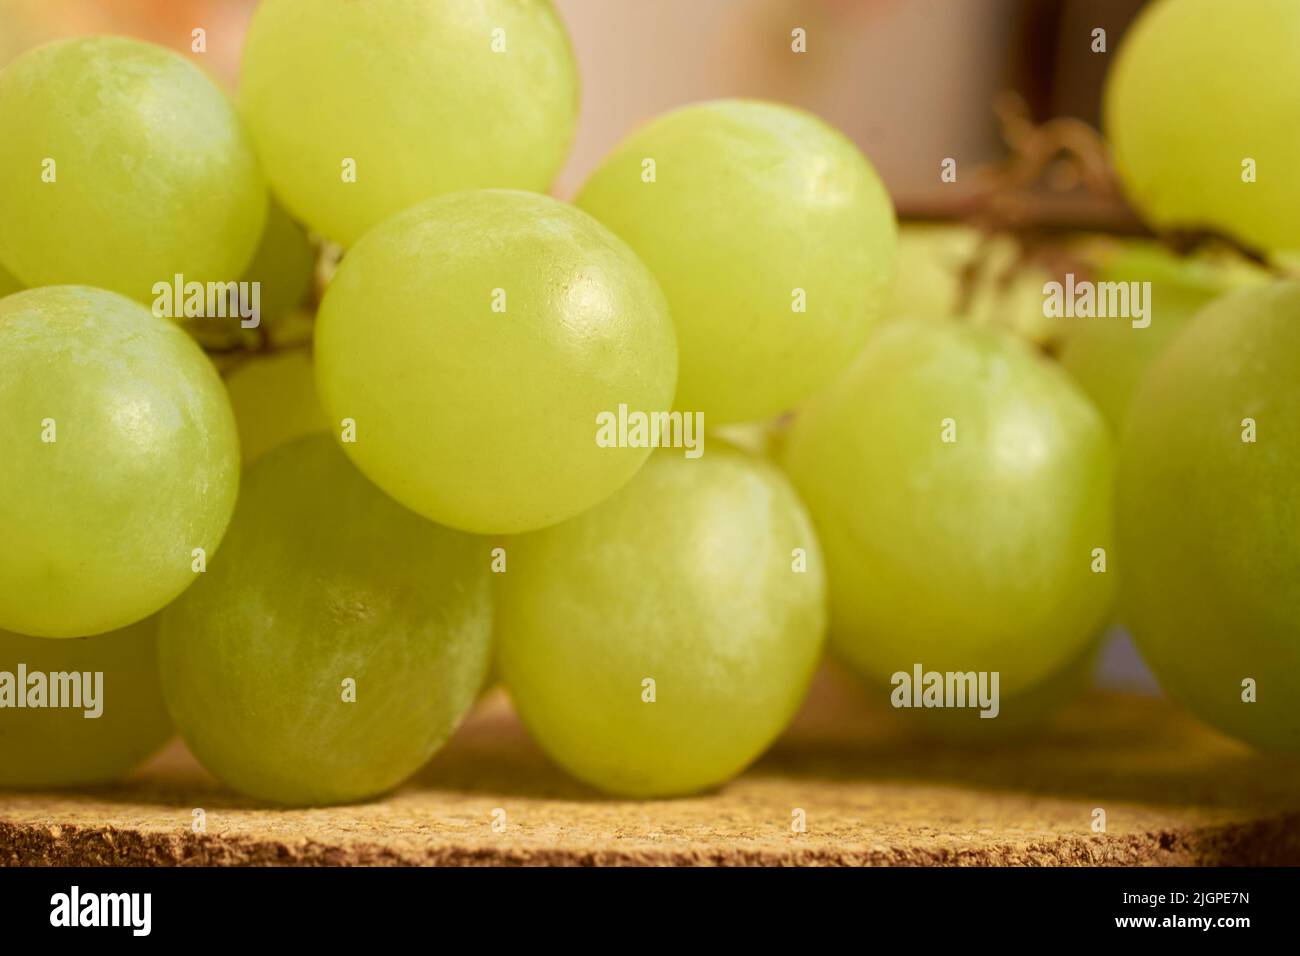 A bunch of green grapes lies on a cork stand. Close-up. Selective focusing Stock Photo